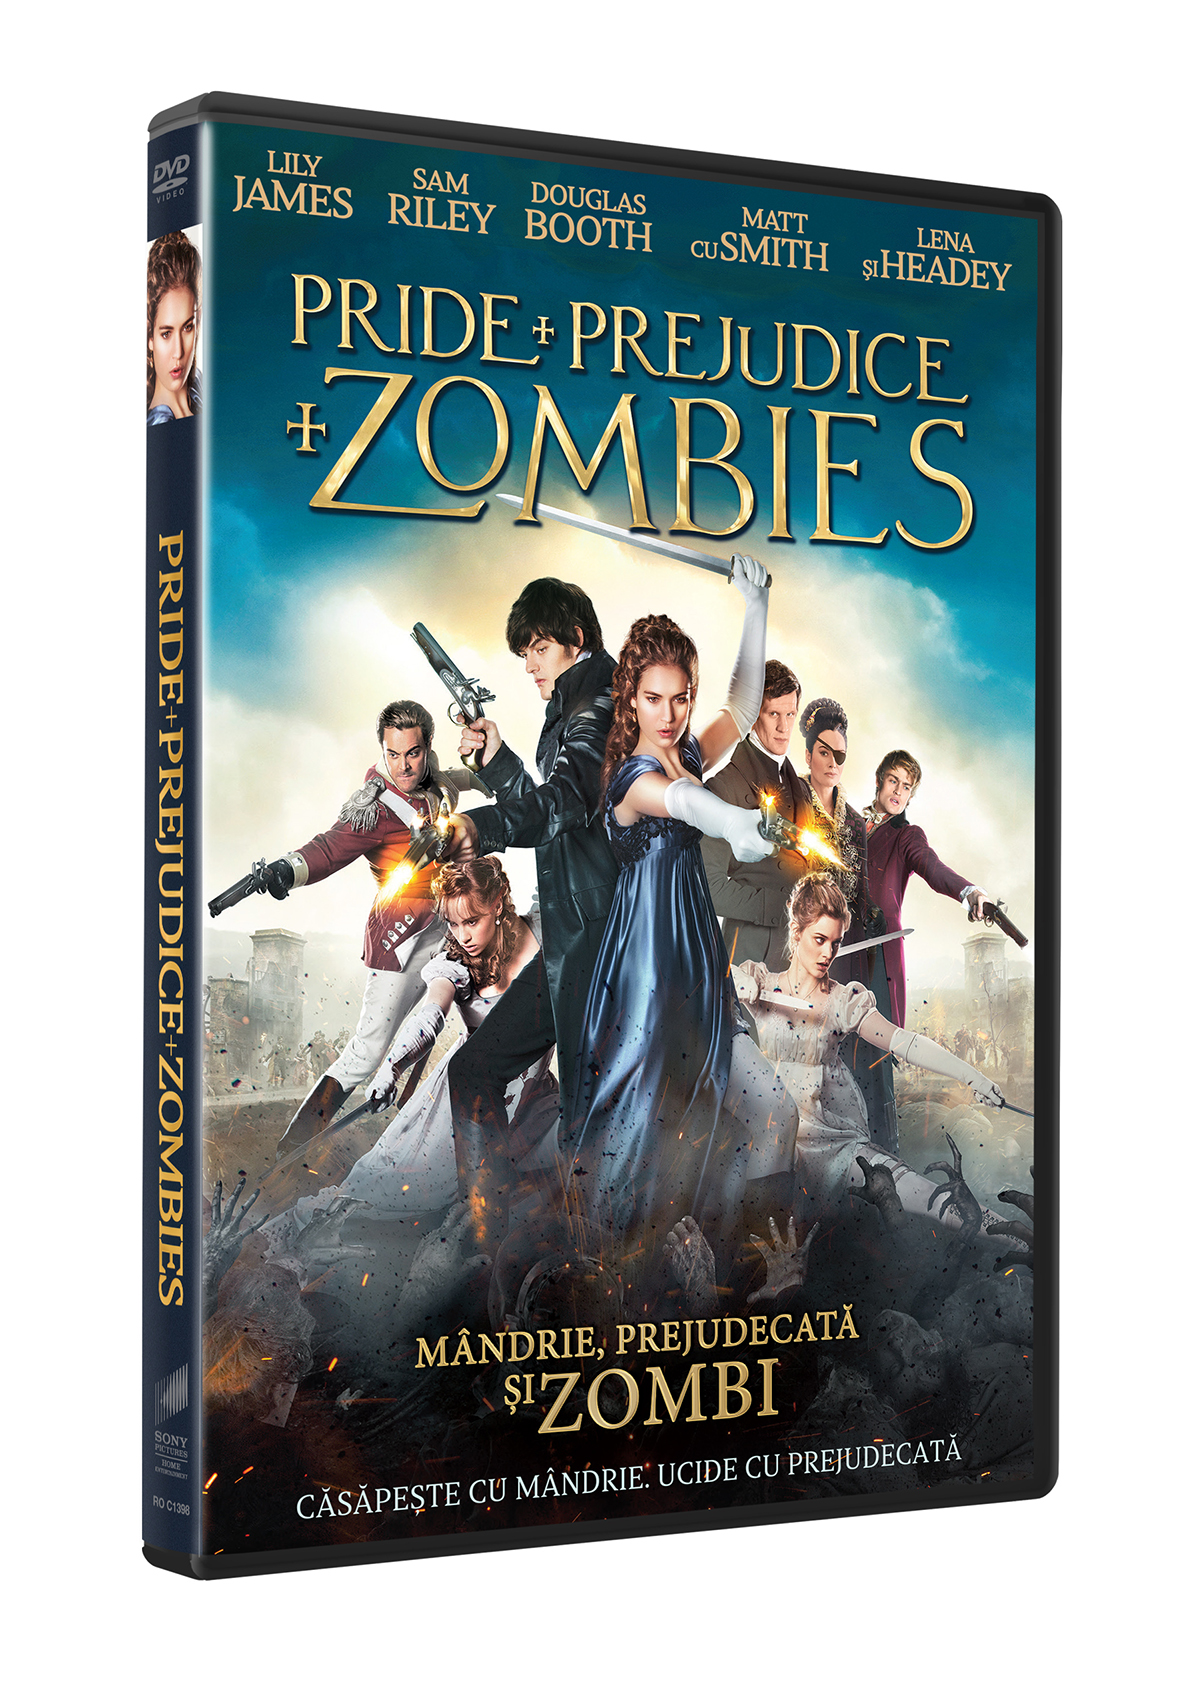 Mandrie, Prejudecata si zombi / Pride and Prejudice and Zombies | Burr Steers image0